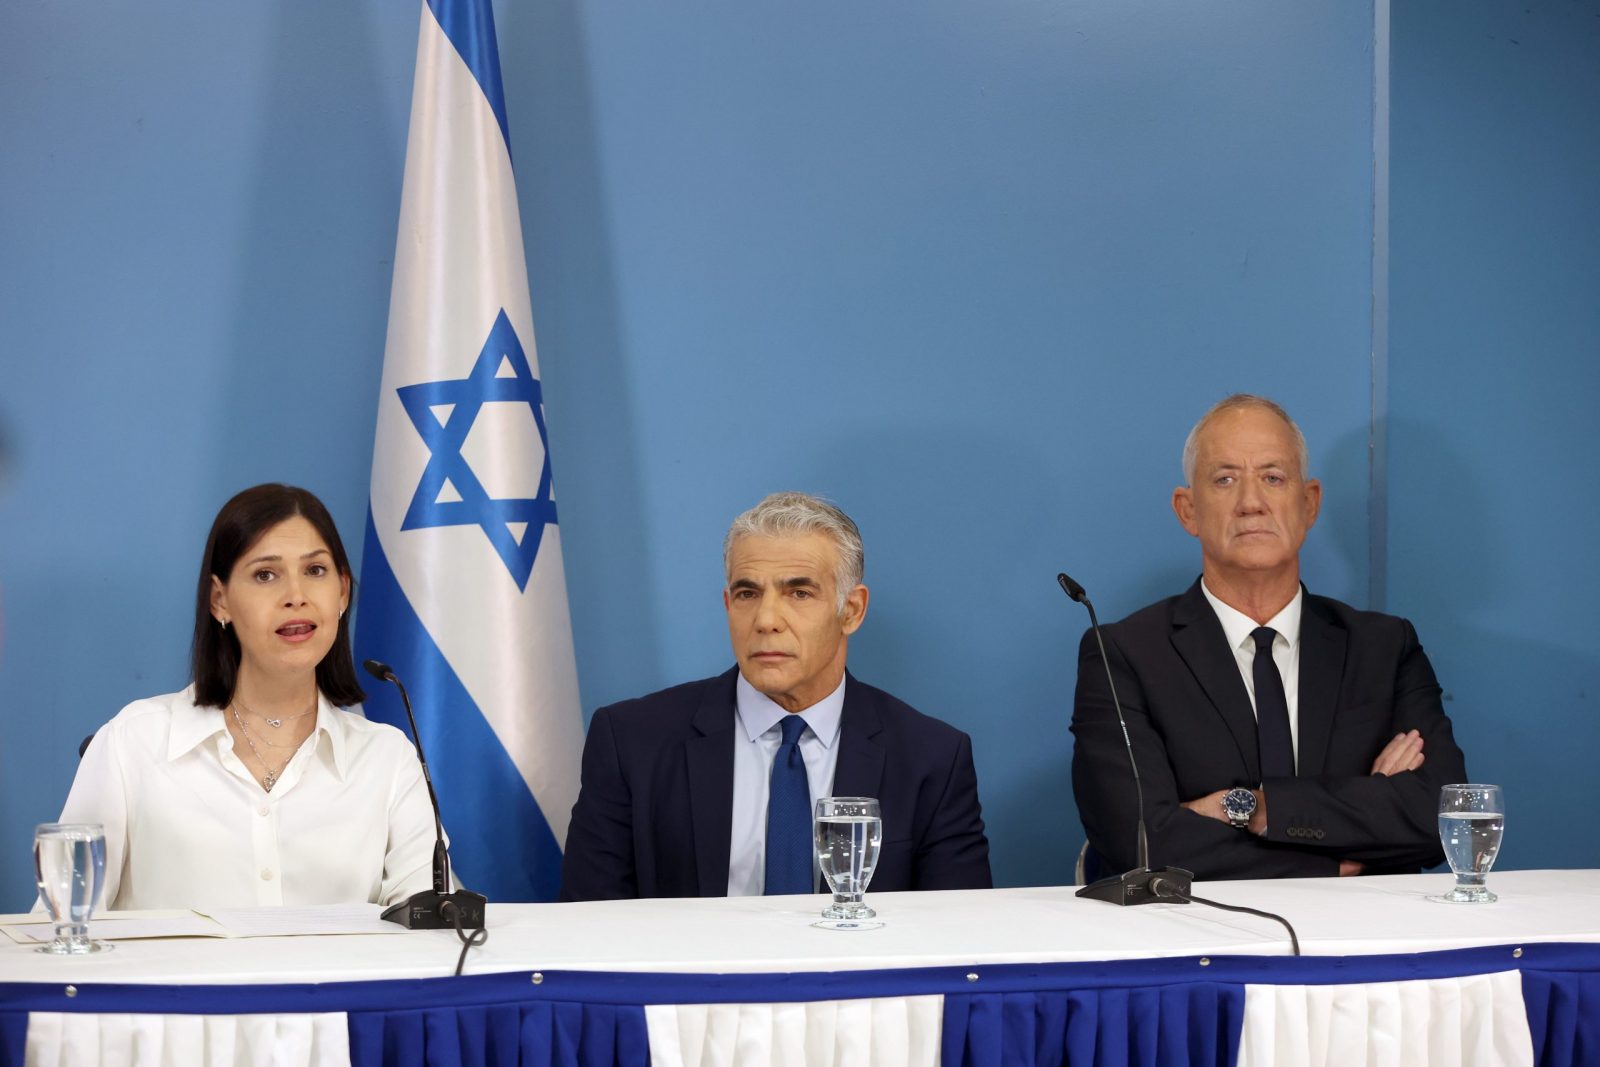 epa10239112 Israeli Prime Minister Yair Lapid (C), Defense Minister Benny Gantz (R) and Minister of Energy Karin Elharar (L) deliver a media statement regarding the maritime agreement between Israel and Lebanon at the Prime Minister's office in Jerusalem, 12 October 2022. The agreement focuses at Karish gas drilling site operated by Energean company and located in the Mediterranean Sea, in the economic waters of Israel, about 90 kilometers west of the coast of Israel, near the northern border between Israel and Lebanon.  EPA/ABIR SULTAN